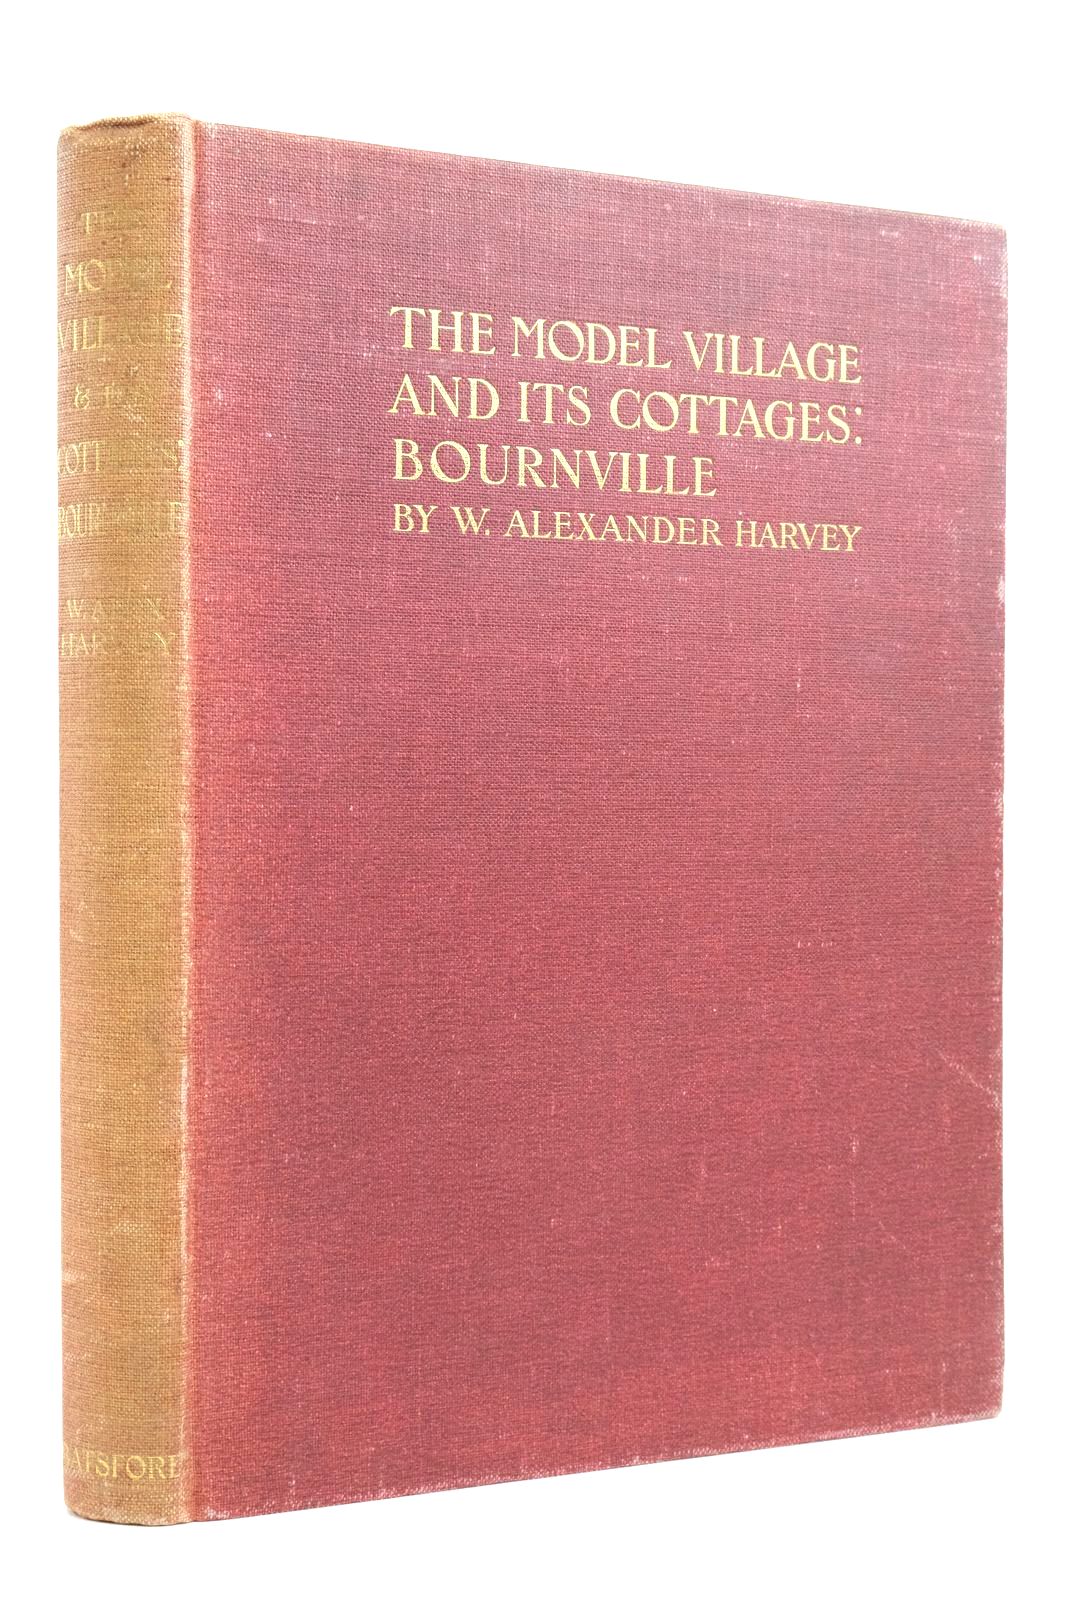 Photo of THE MODEL VILLAGE AND ITS COTTAGES: BOURNVILLE written by Havey, W. Alexander published by B.T. Batsford (STOCK CODE: 2136428)  for sale by Stella & Rose's Books